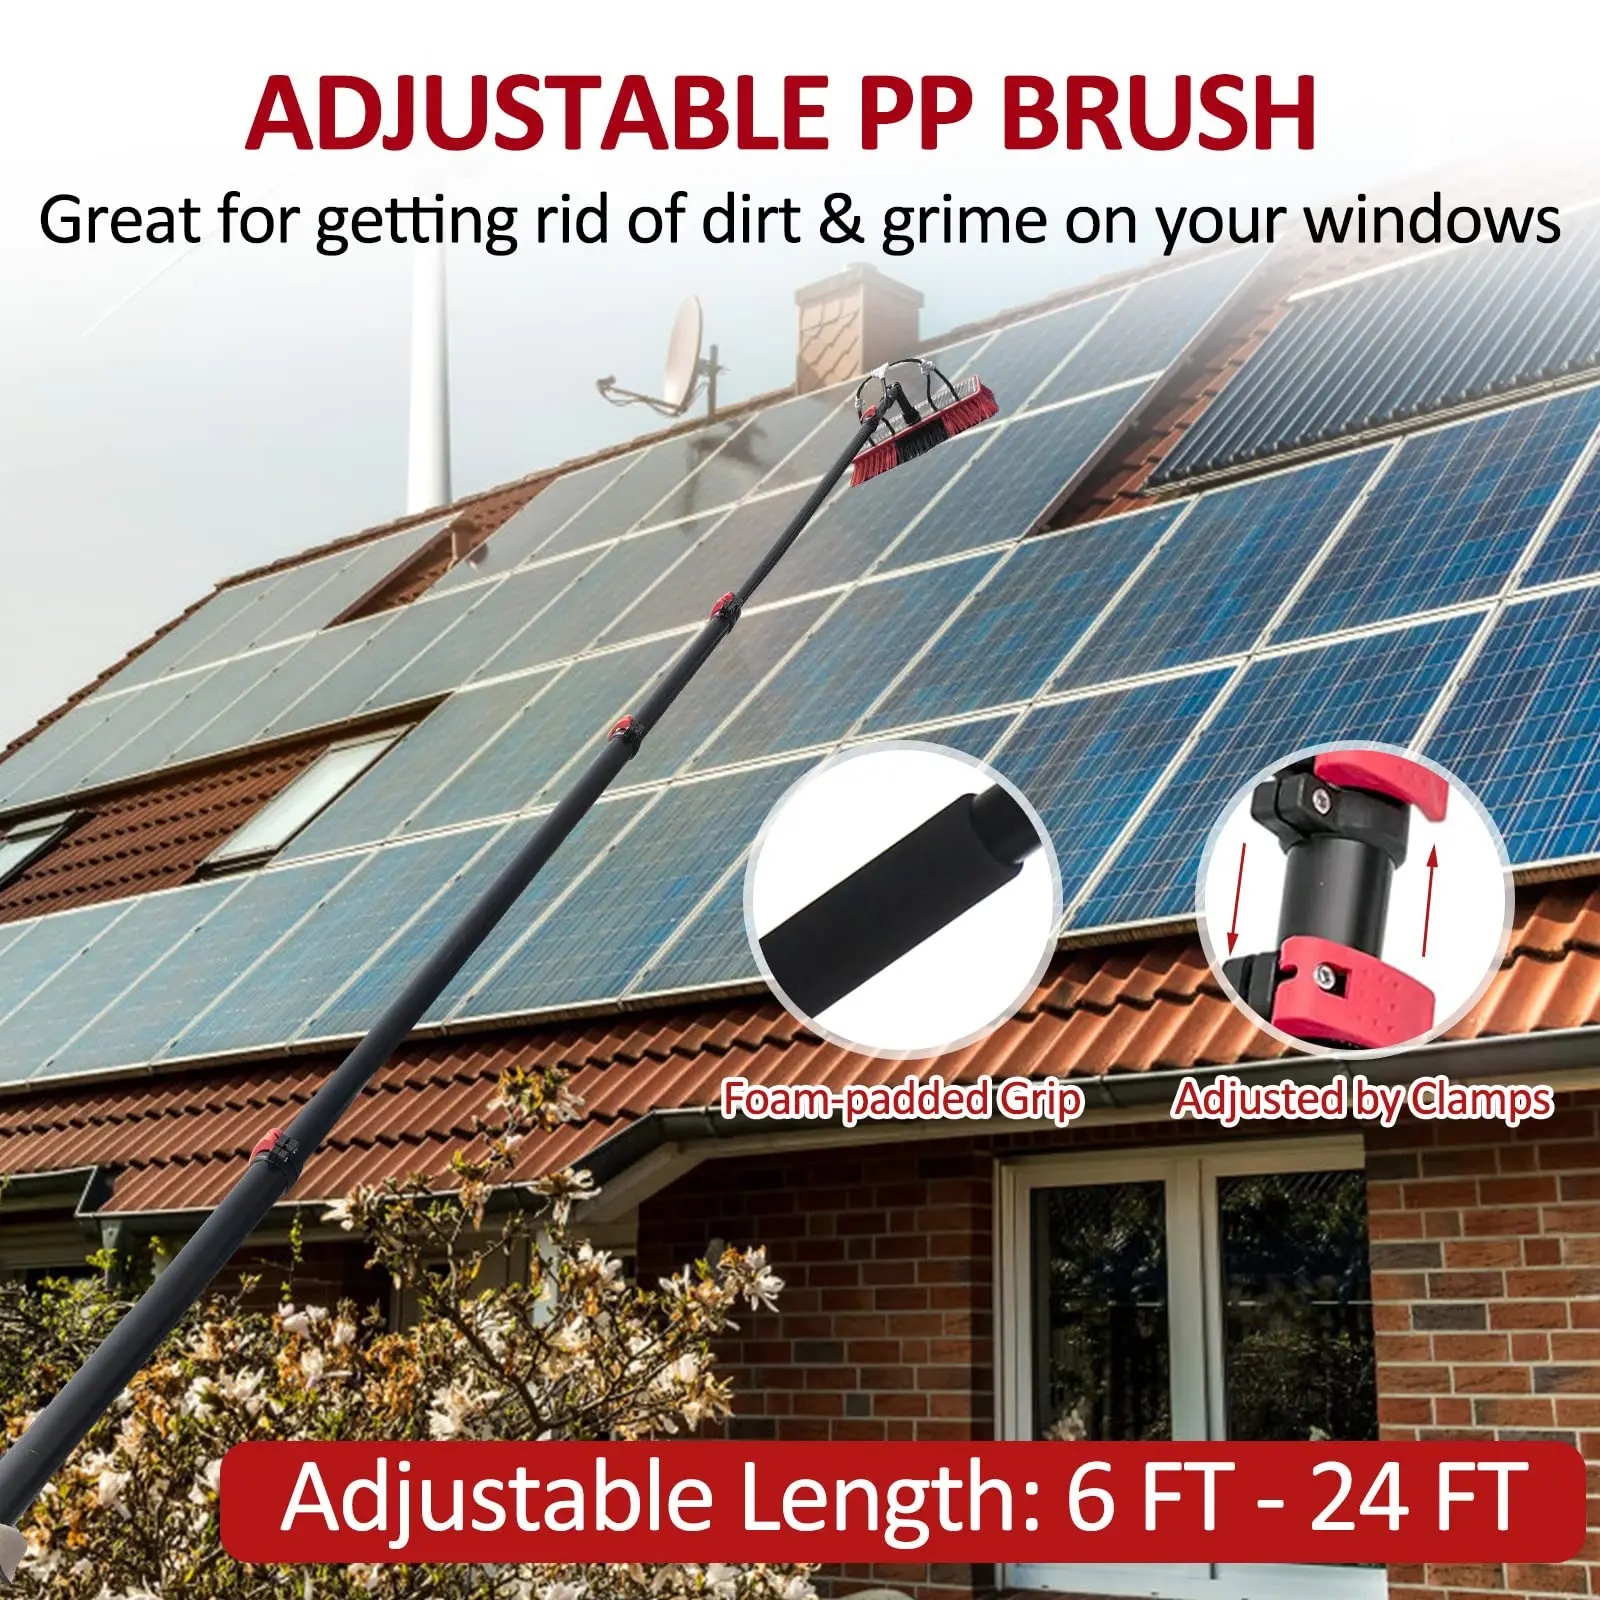 Solar Panel Cleaning Water Fed Pole 6M Telescopic